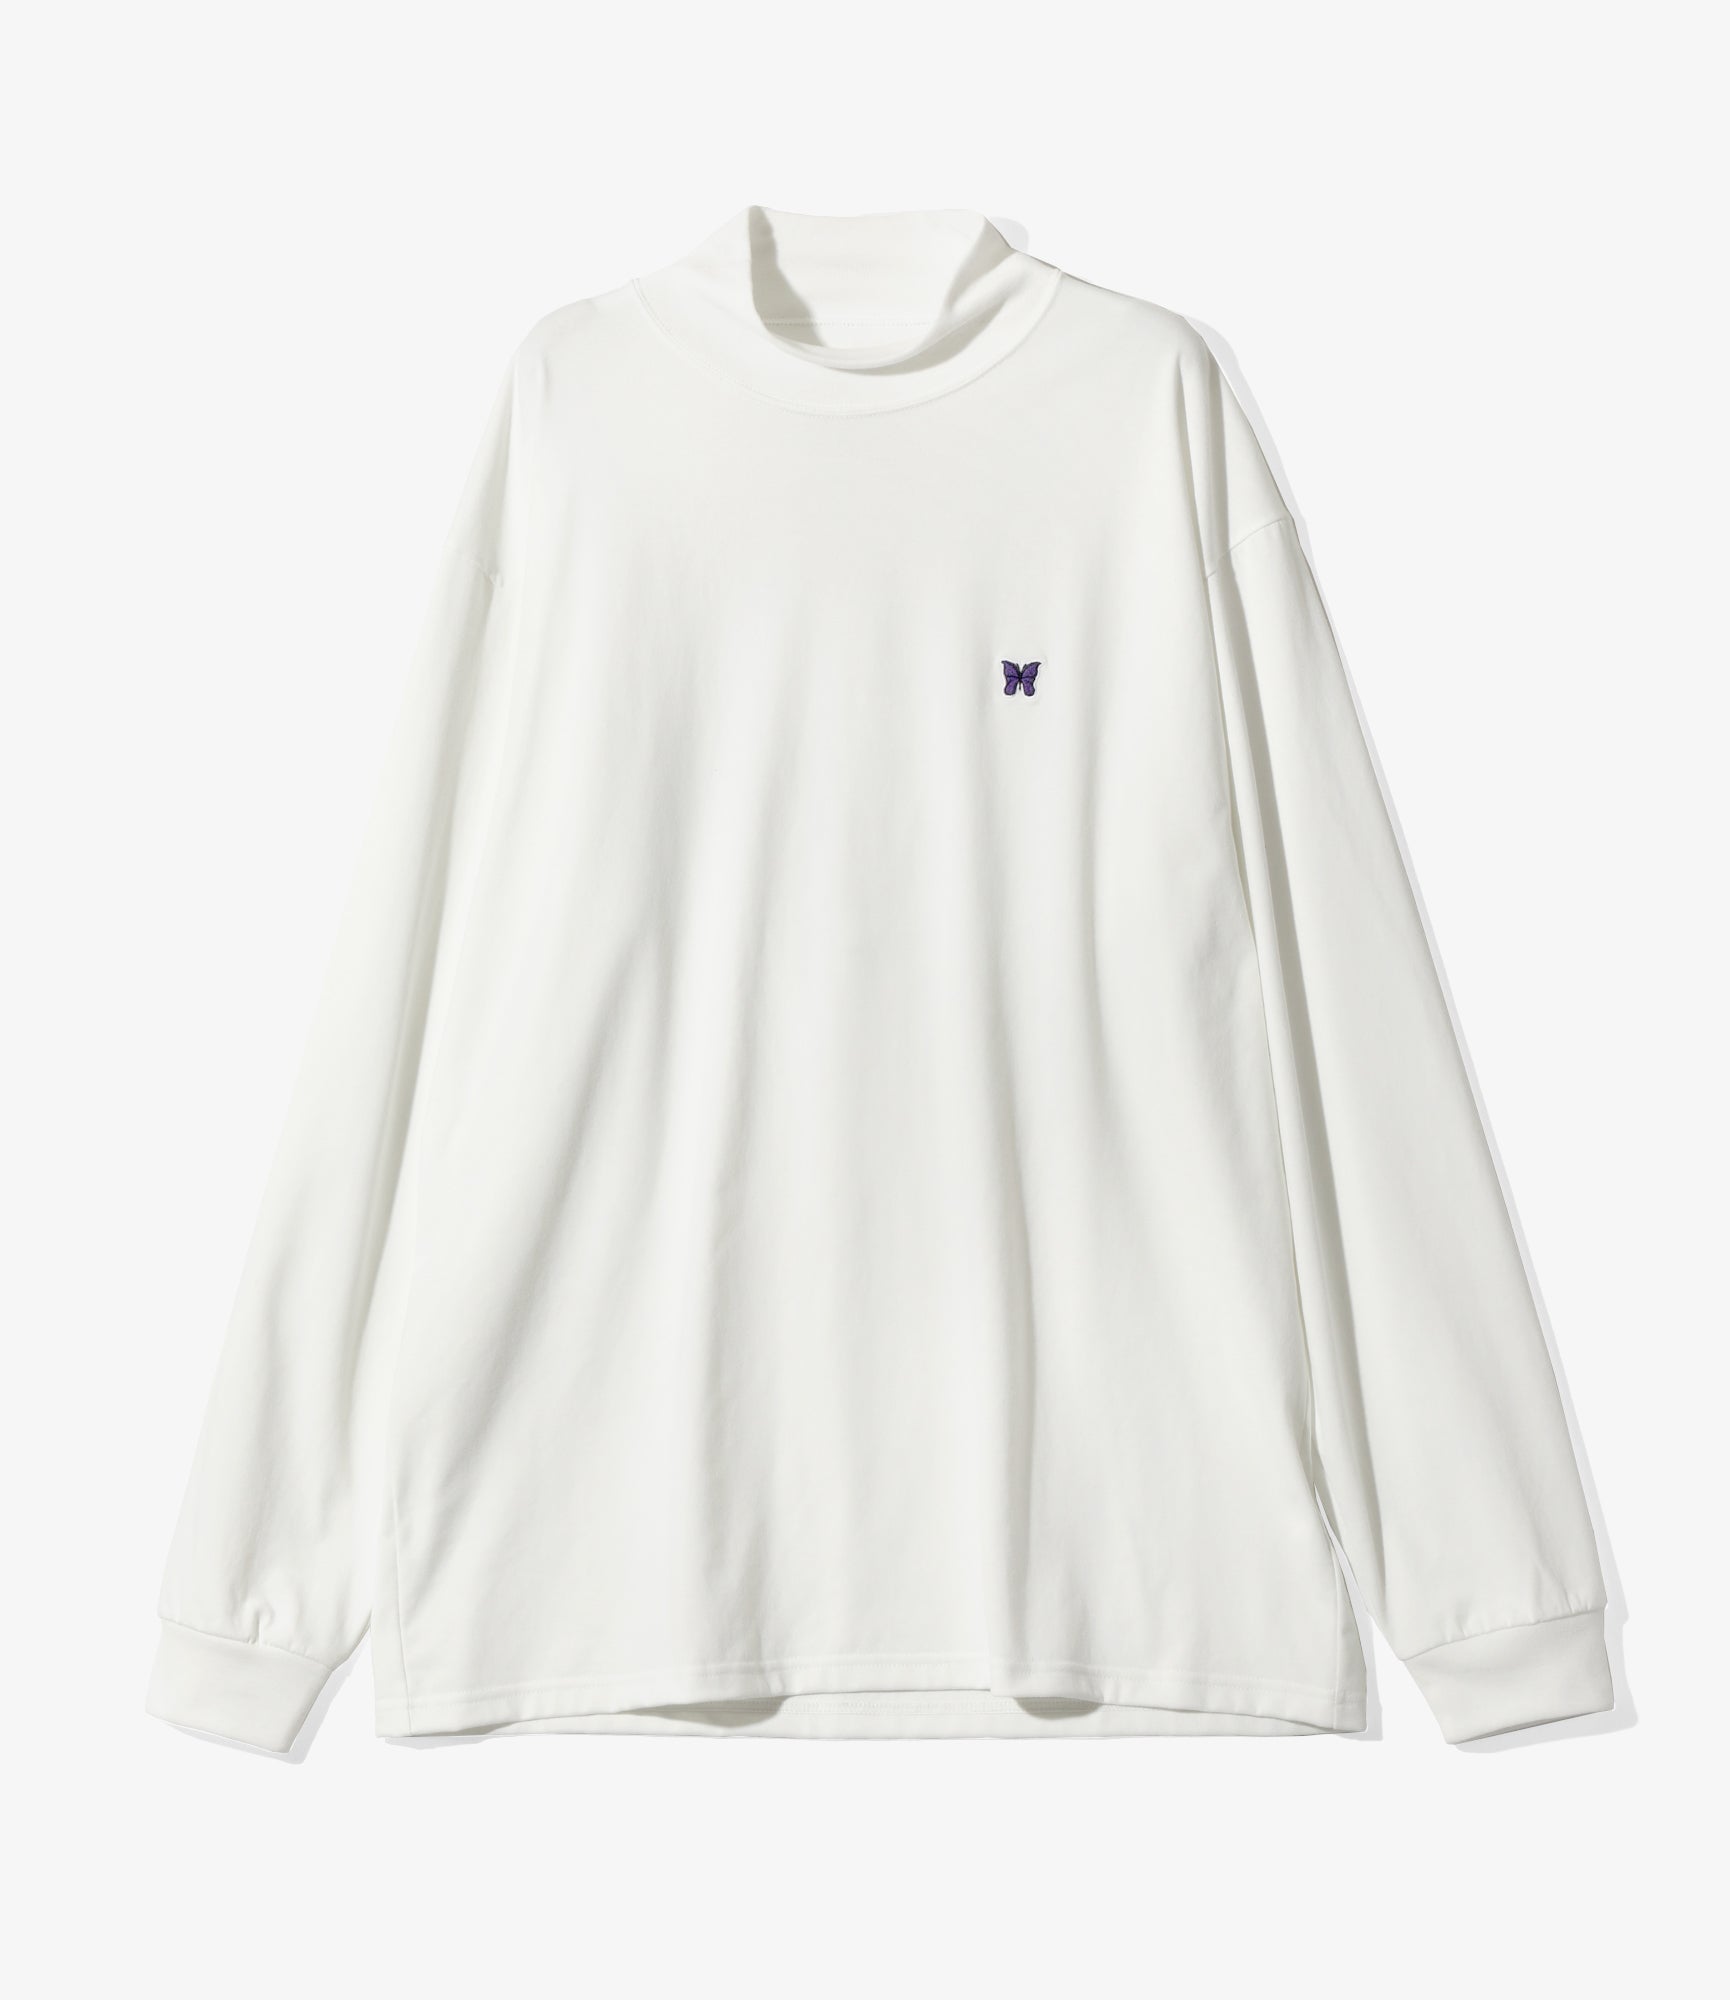 L/S Mock Neck Tee - White - Poly Jersey